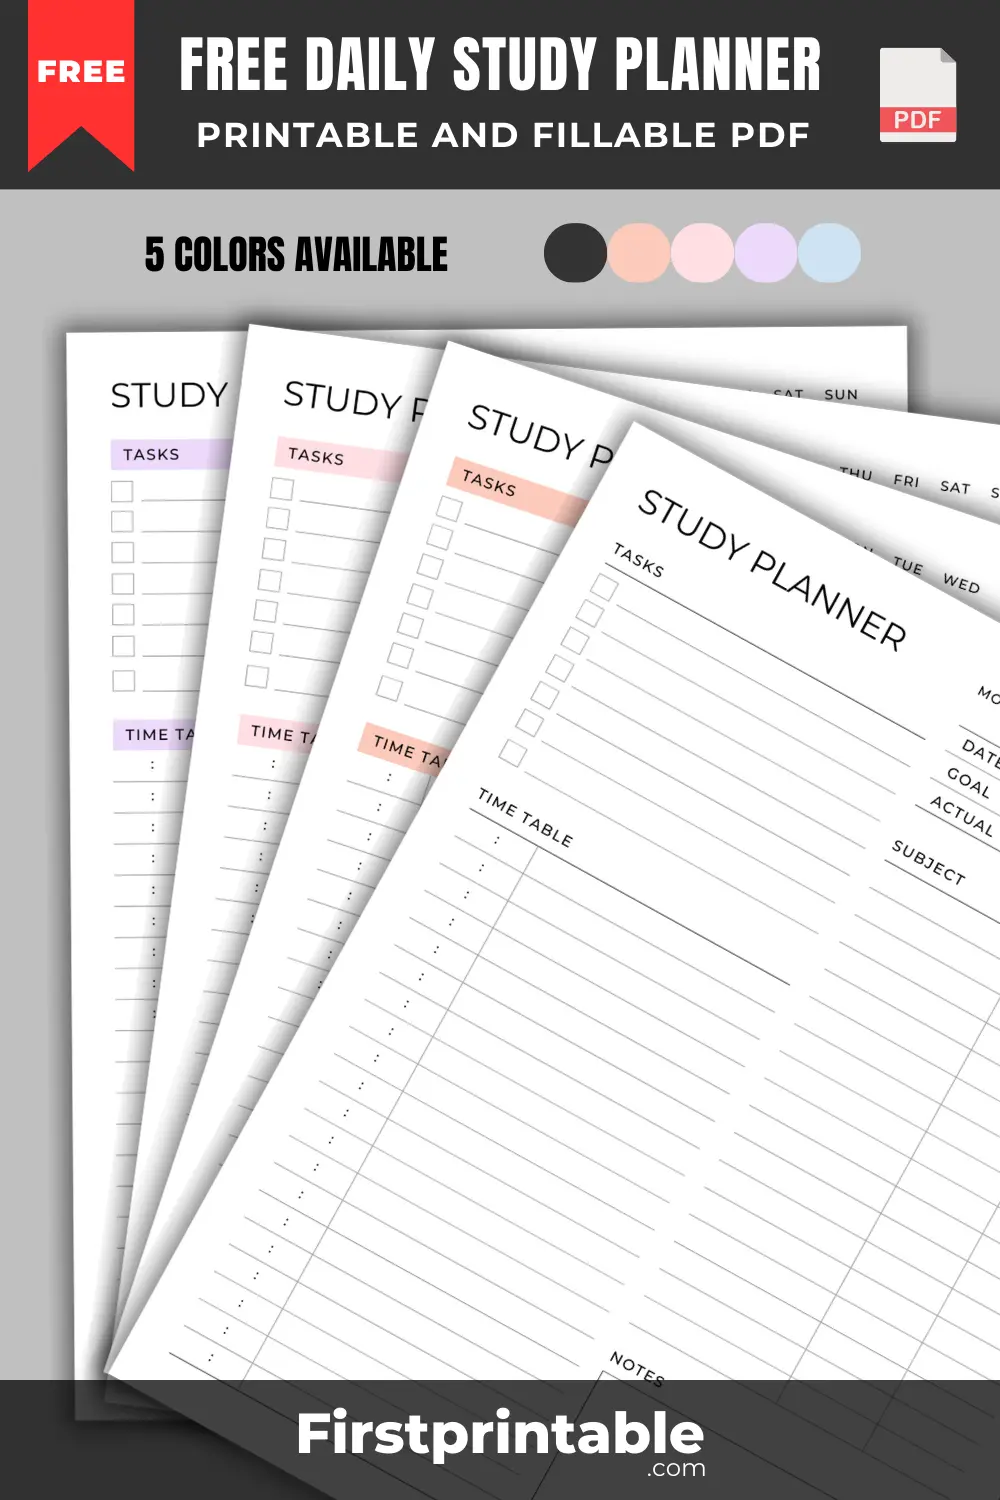 Printable Daily Study Planner | Fillable PDF